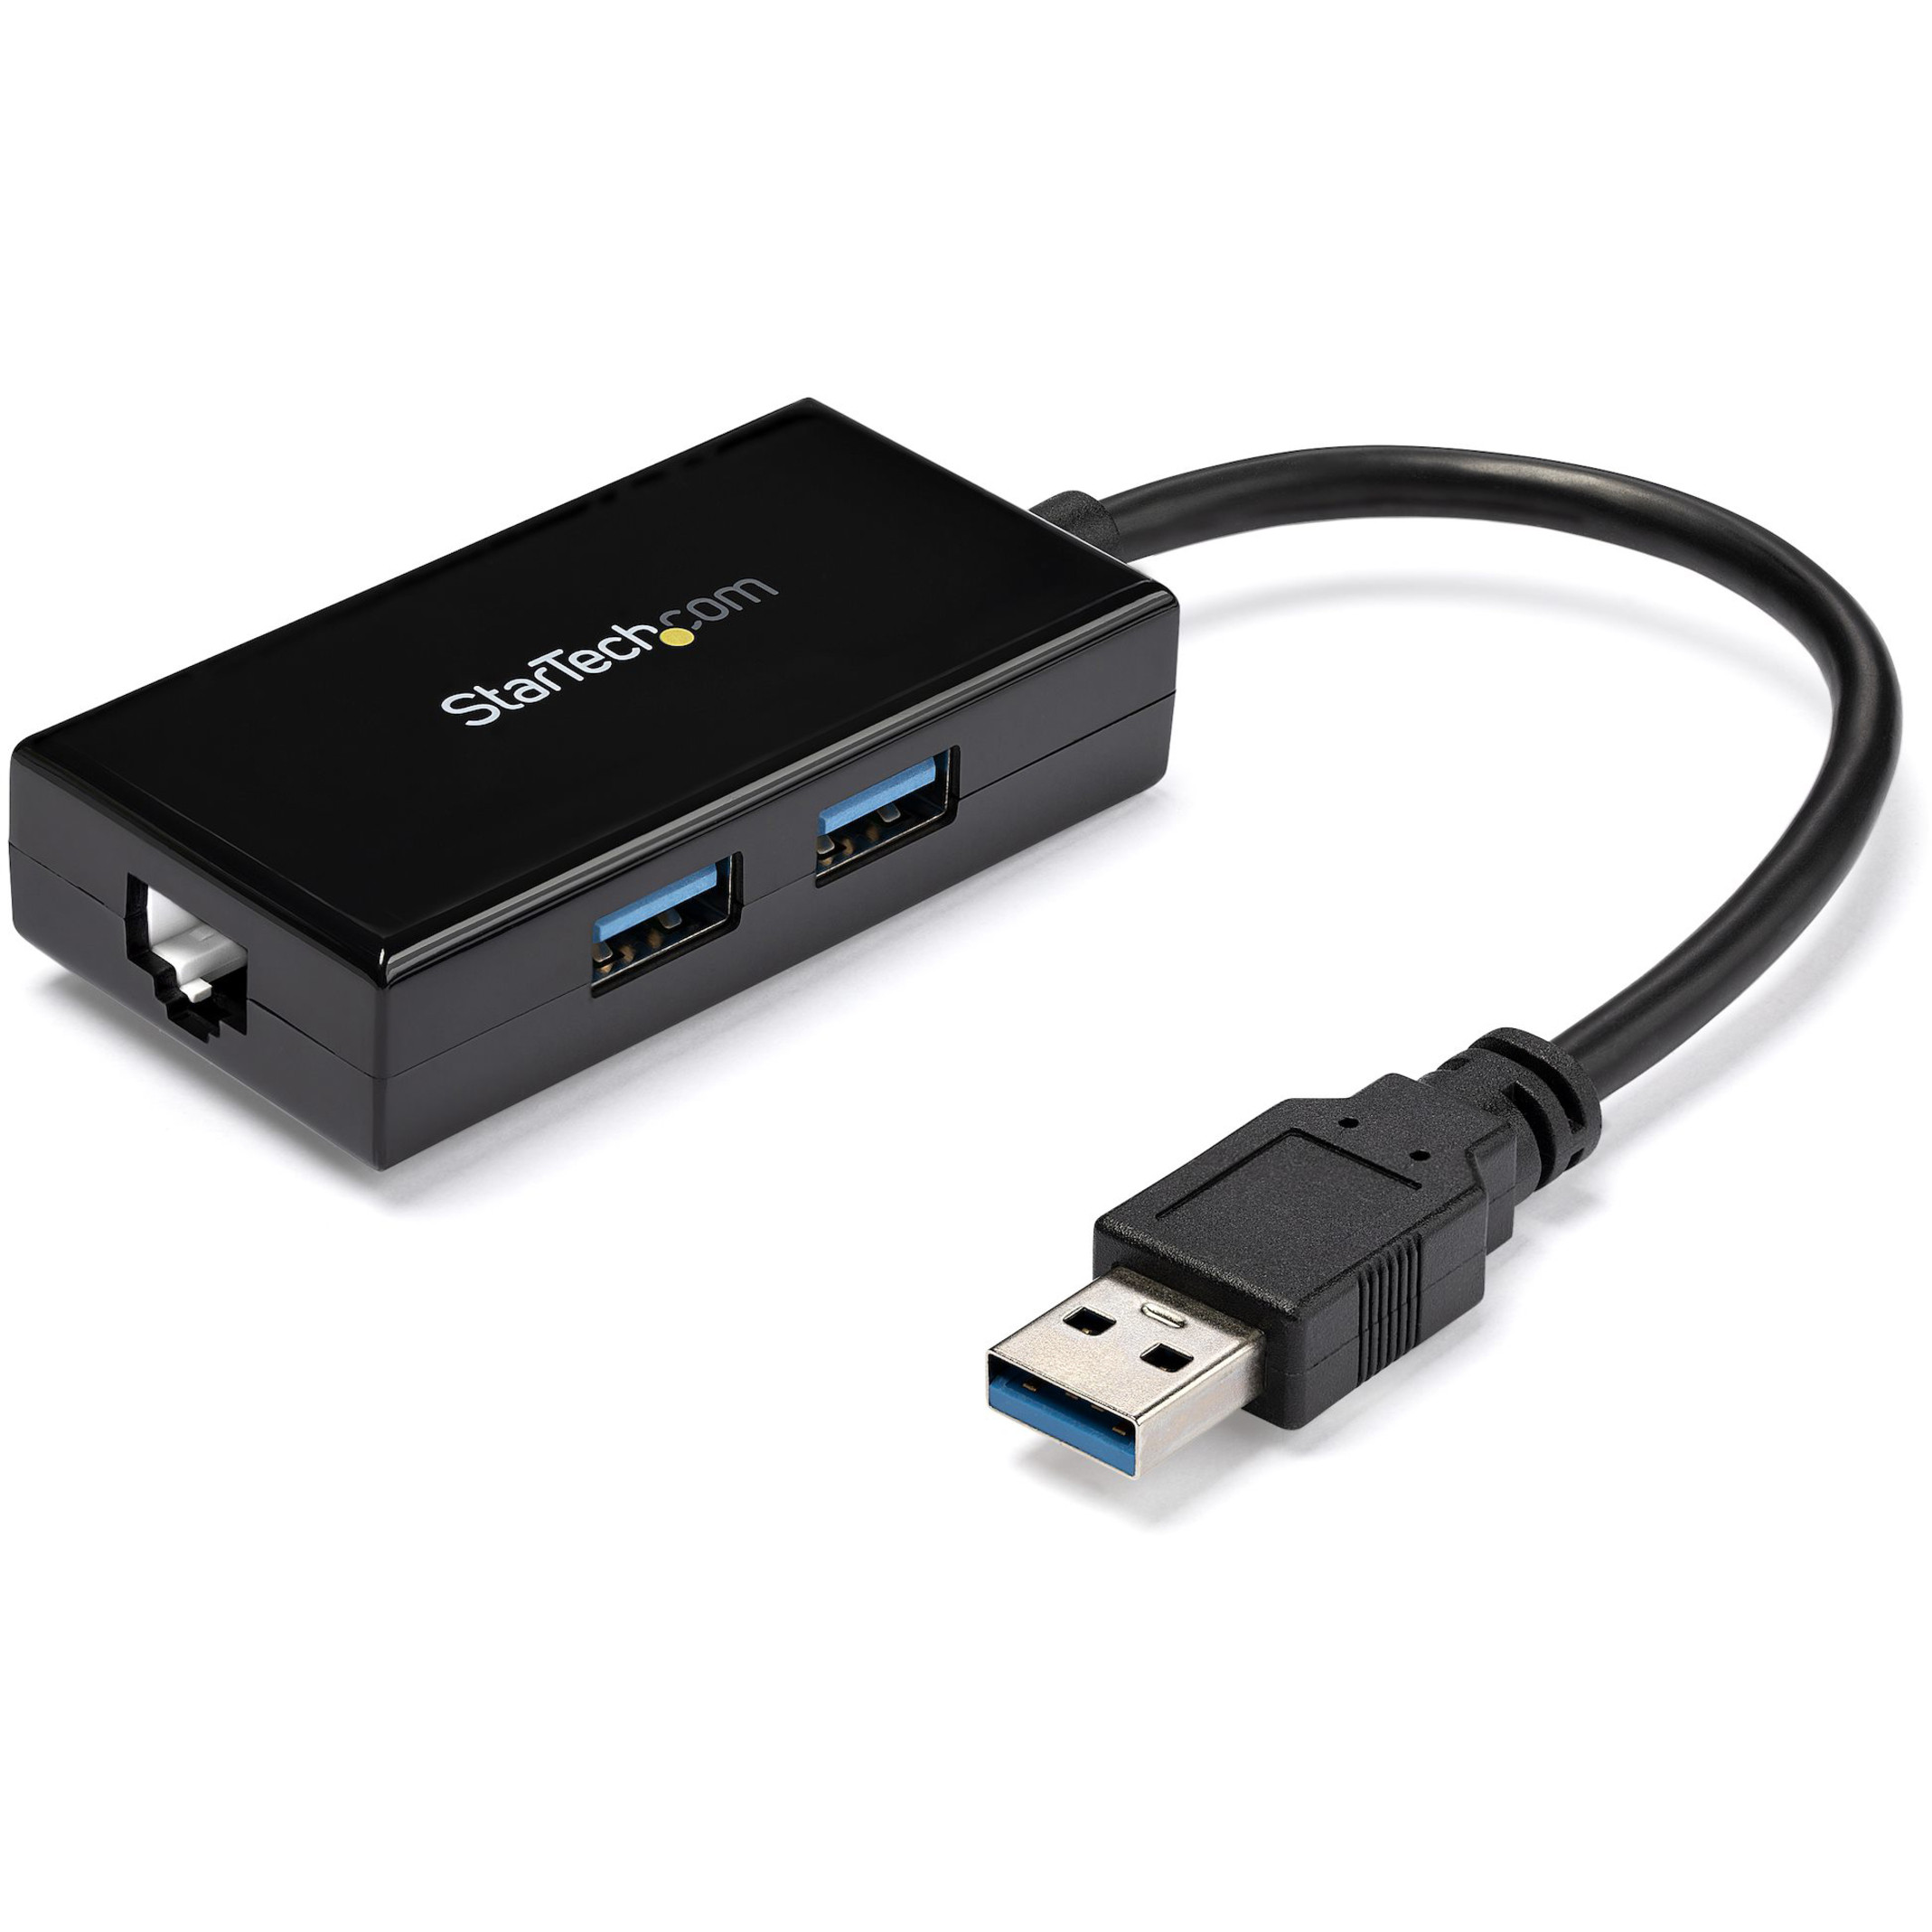 Startech .com USB 3.0 to Gigabit Network Adapter with Built-In 2-Port USB HubNative Driver Support (Windows, Mac and Chrome OS)Add Giga… USB31000S2H